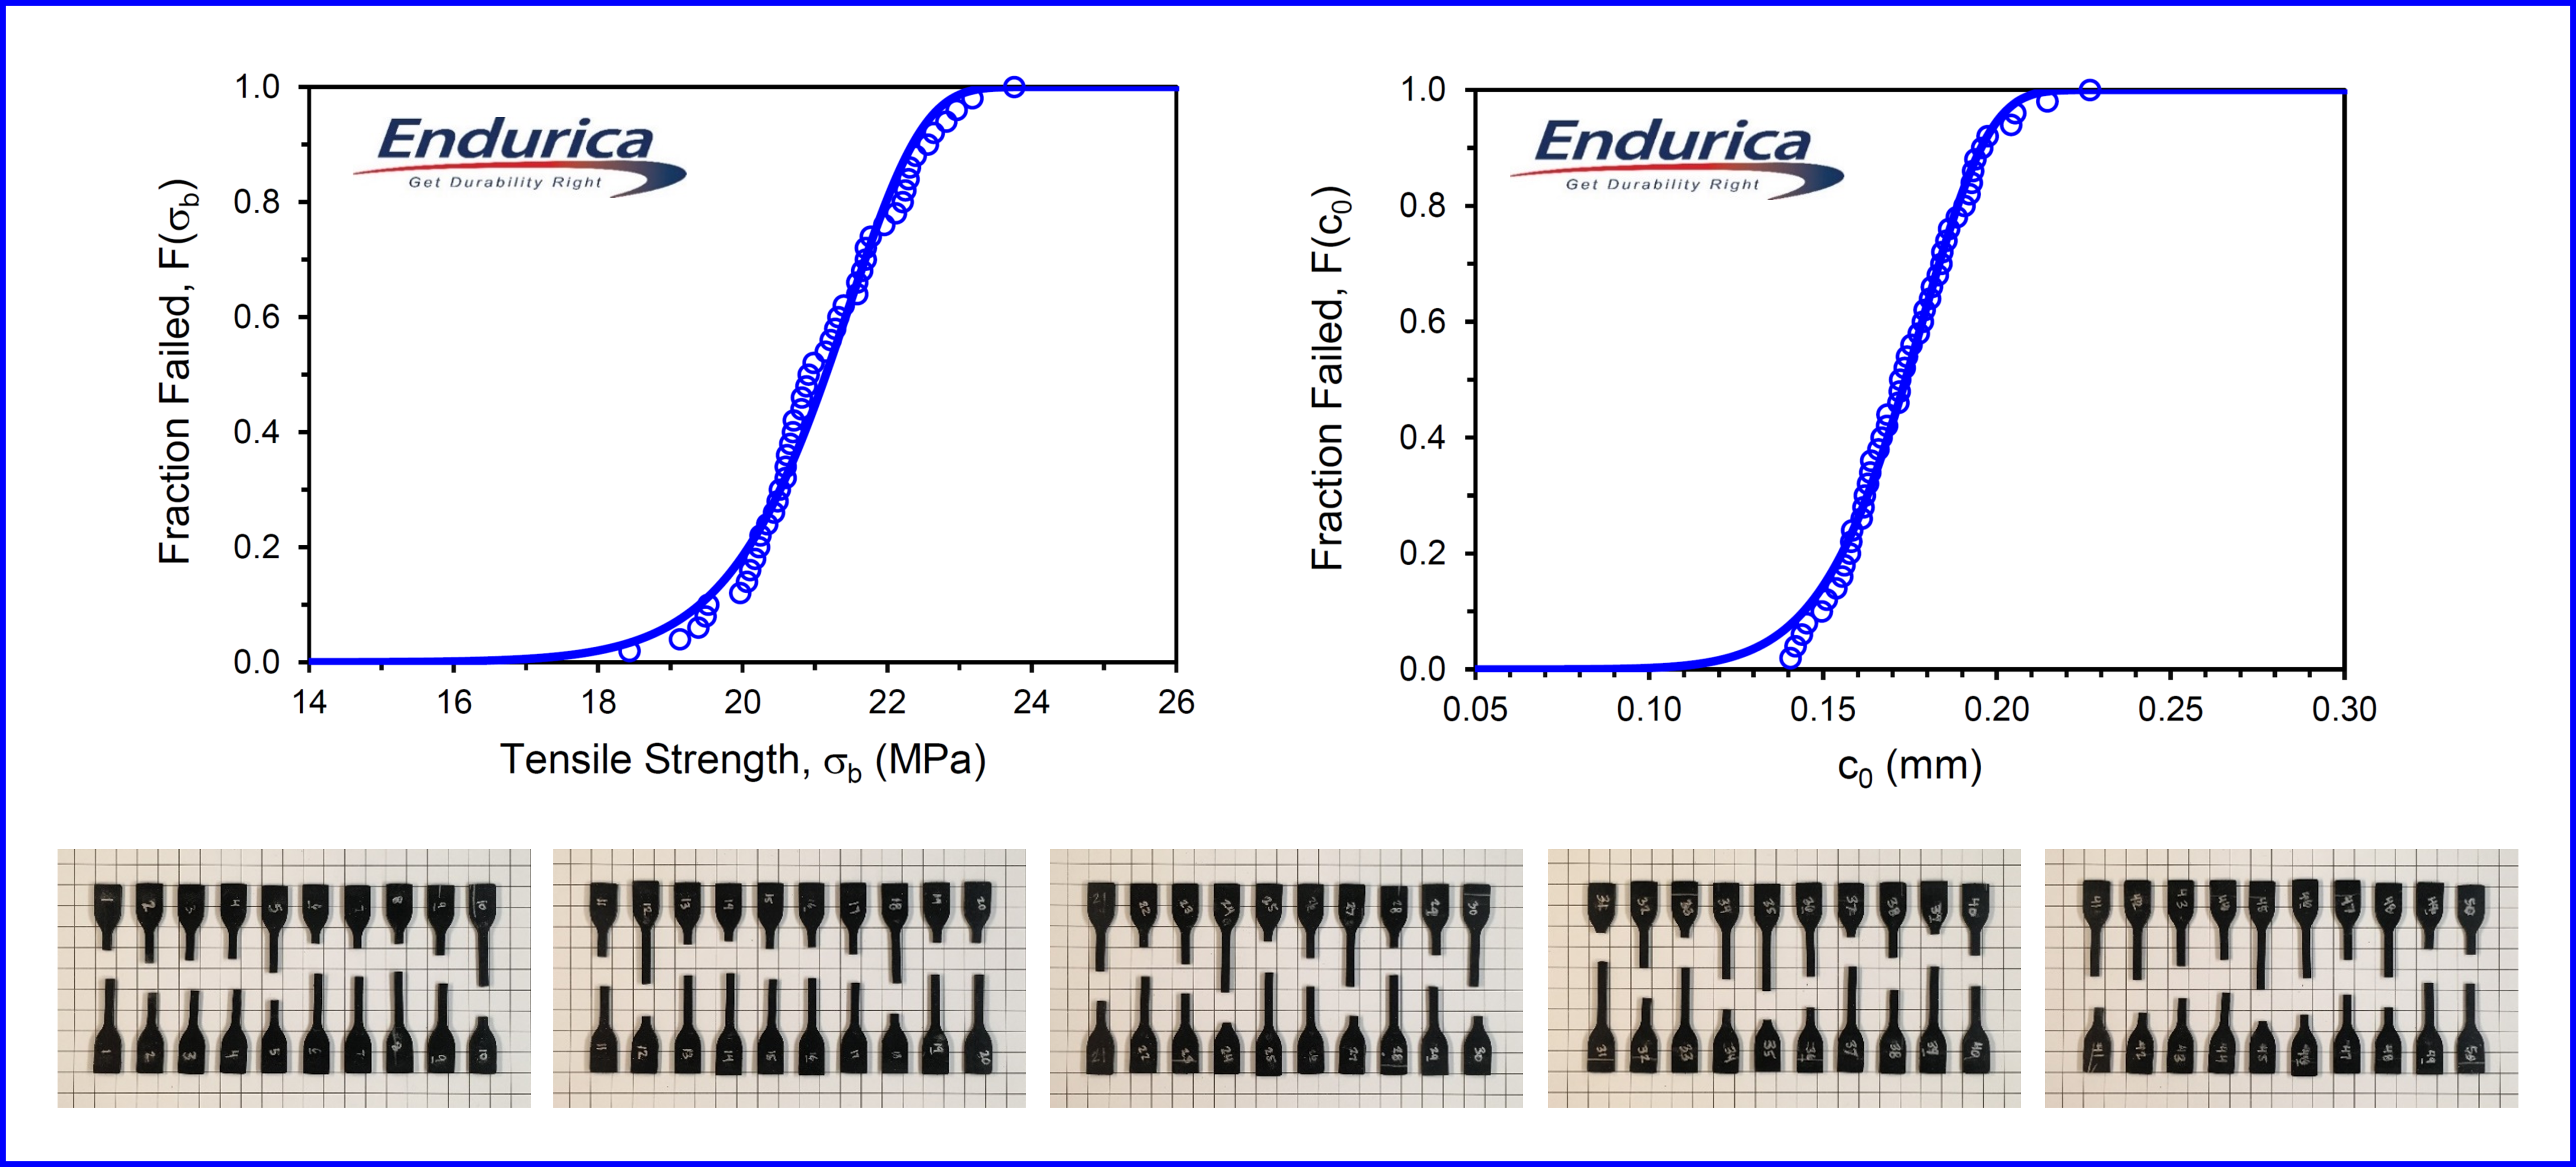 Endurica for Reliability and Durability